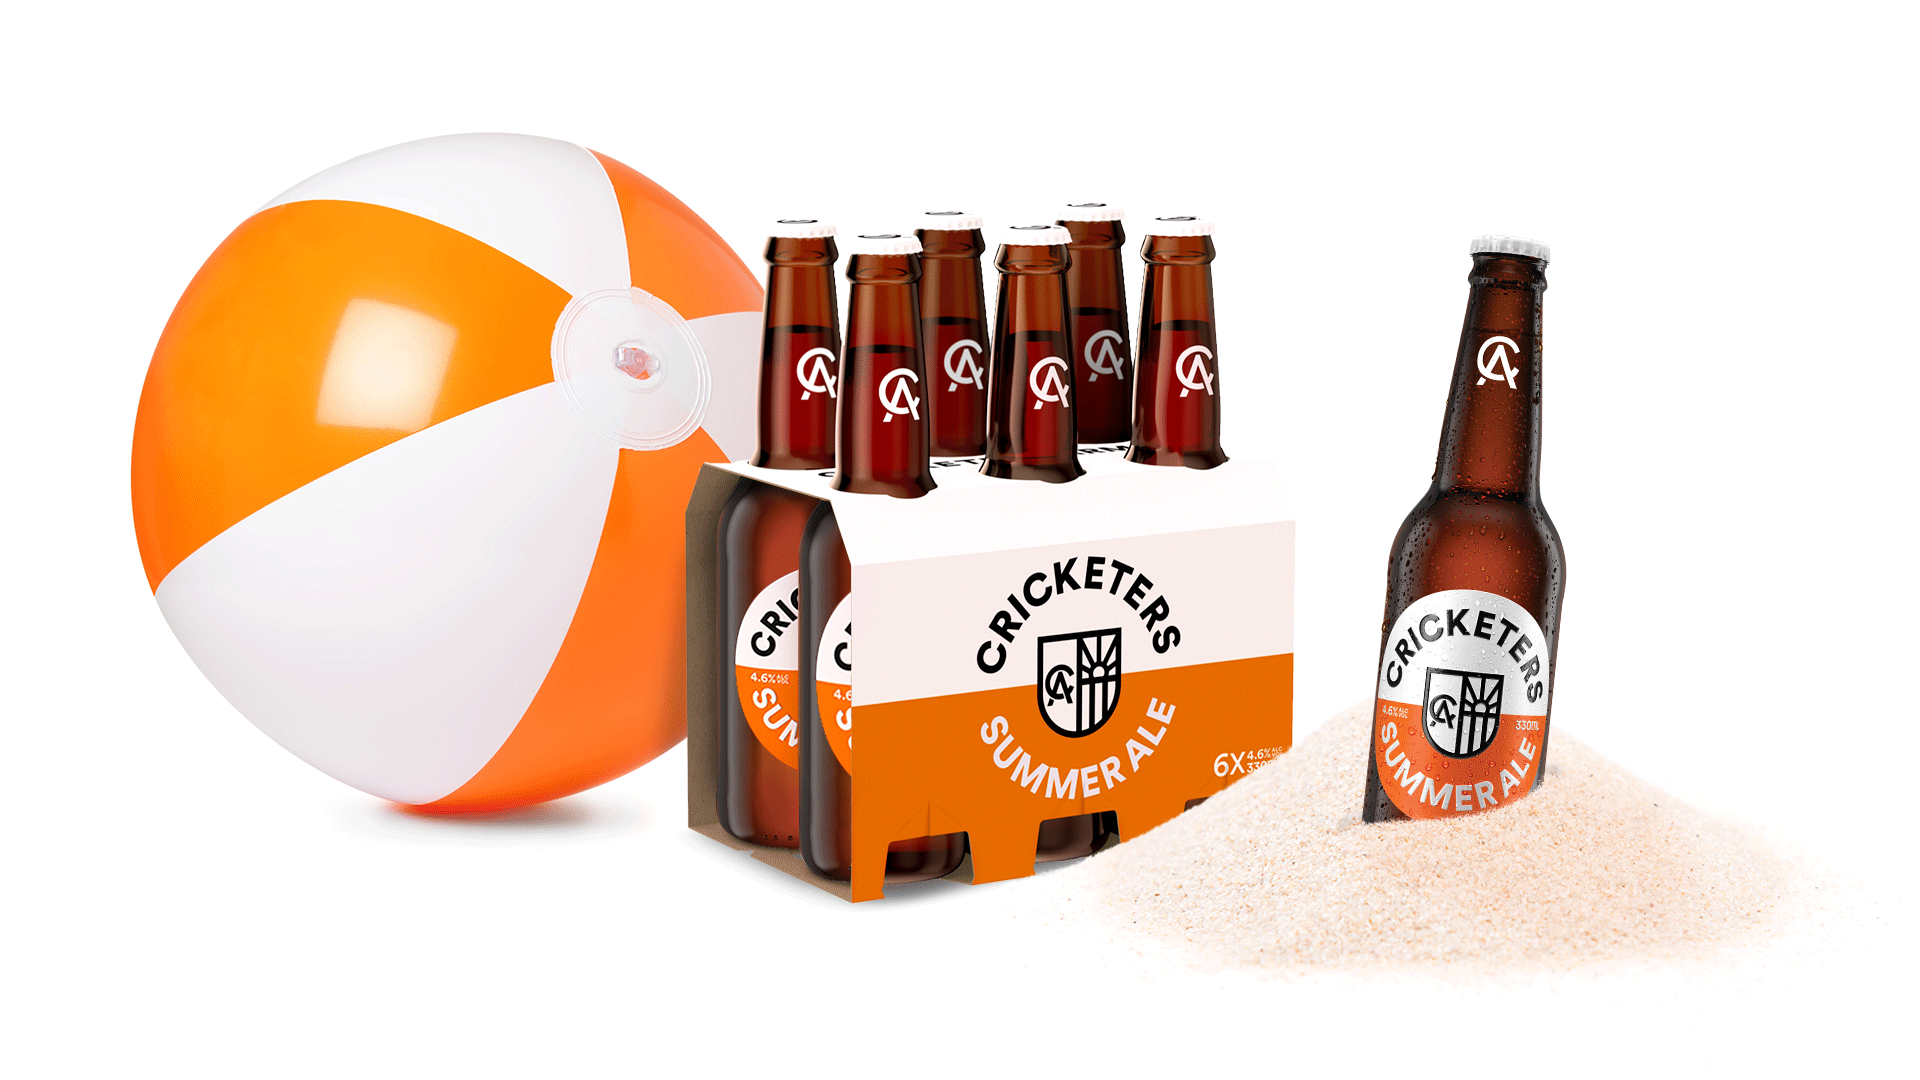 Cricketers Summer Ale single bottle branding and six-pack packaging, in a pile of sand next to a blow up beach ball.